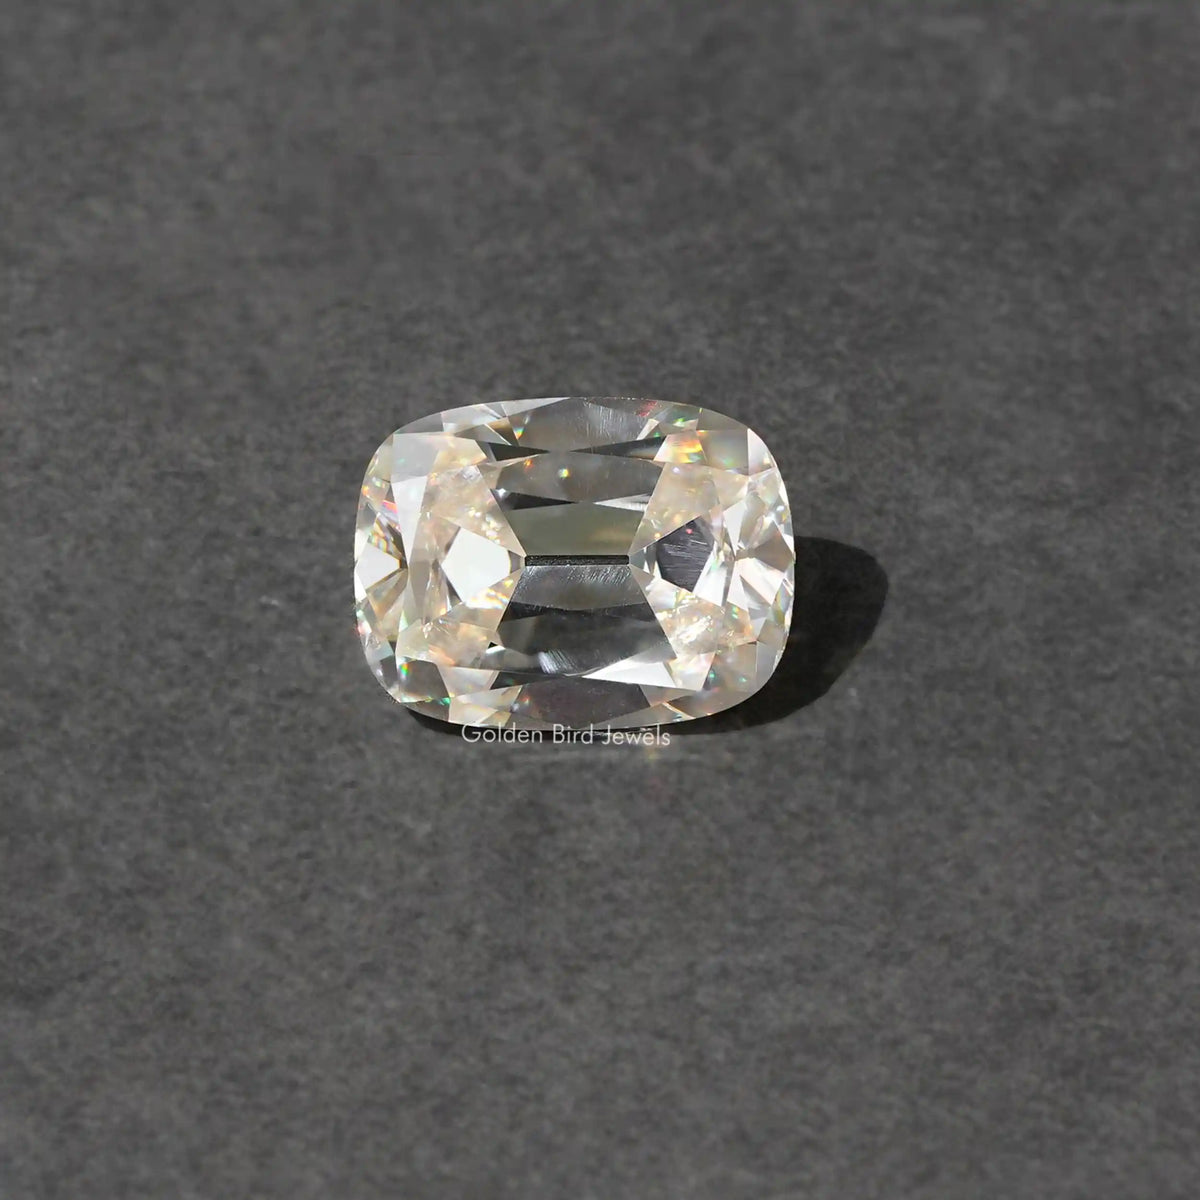 [Front view of old mine cut cushion loose moissanite]-[Golden Bird Jewels]